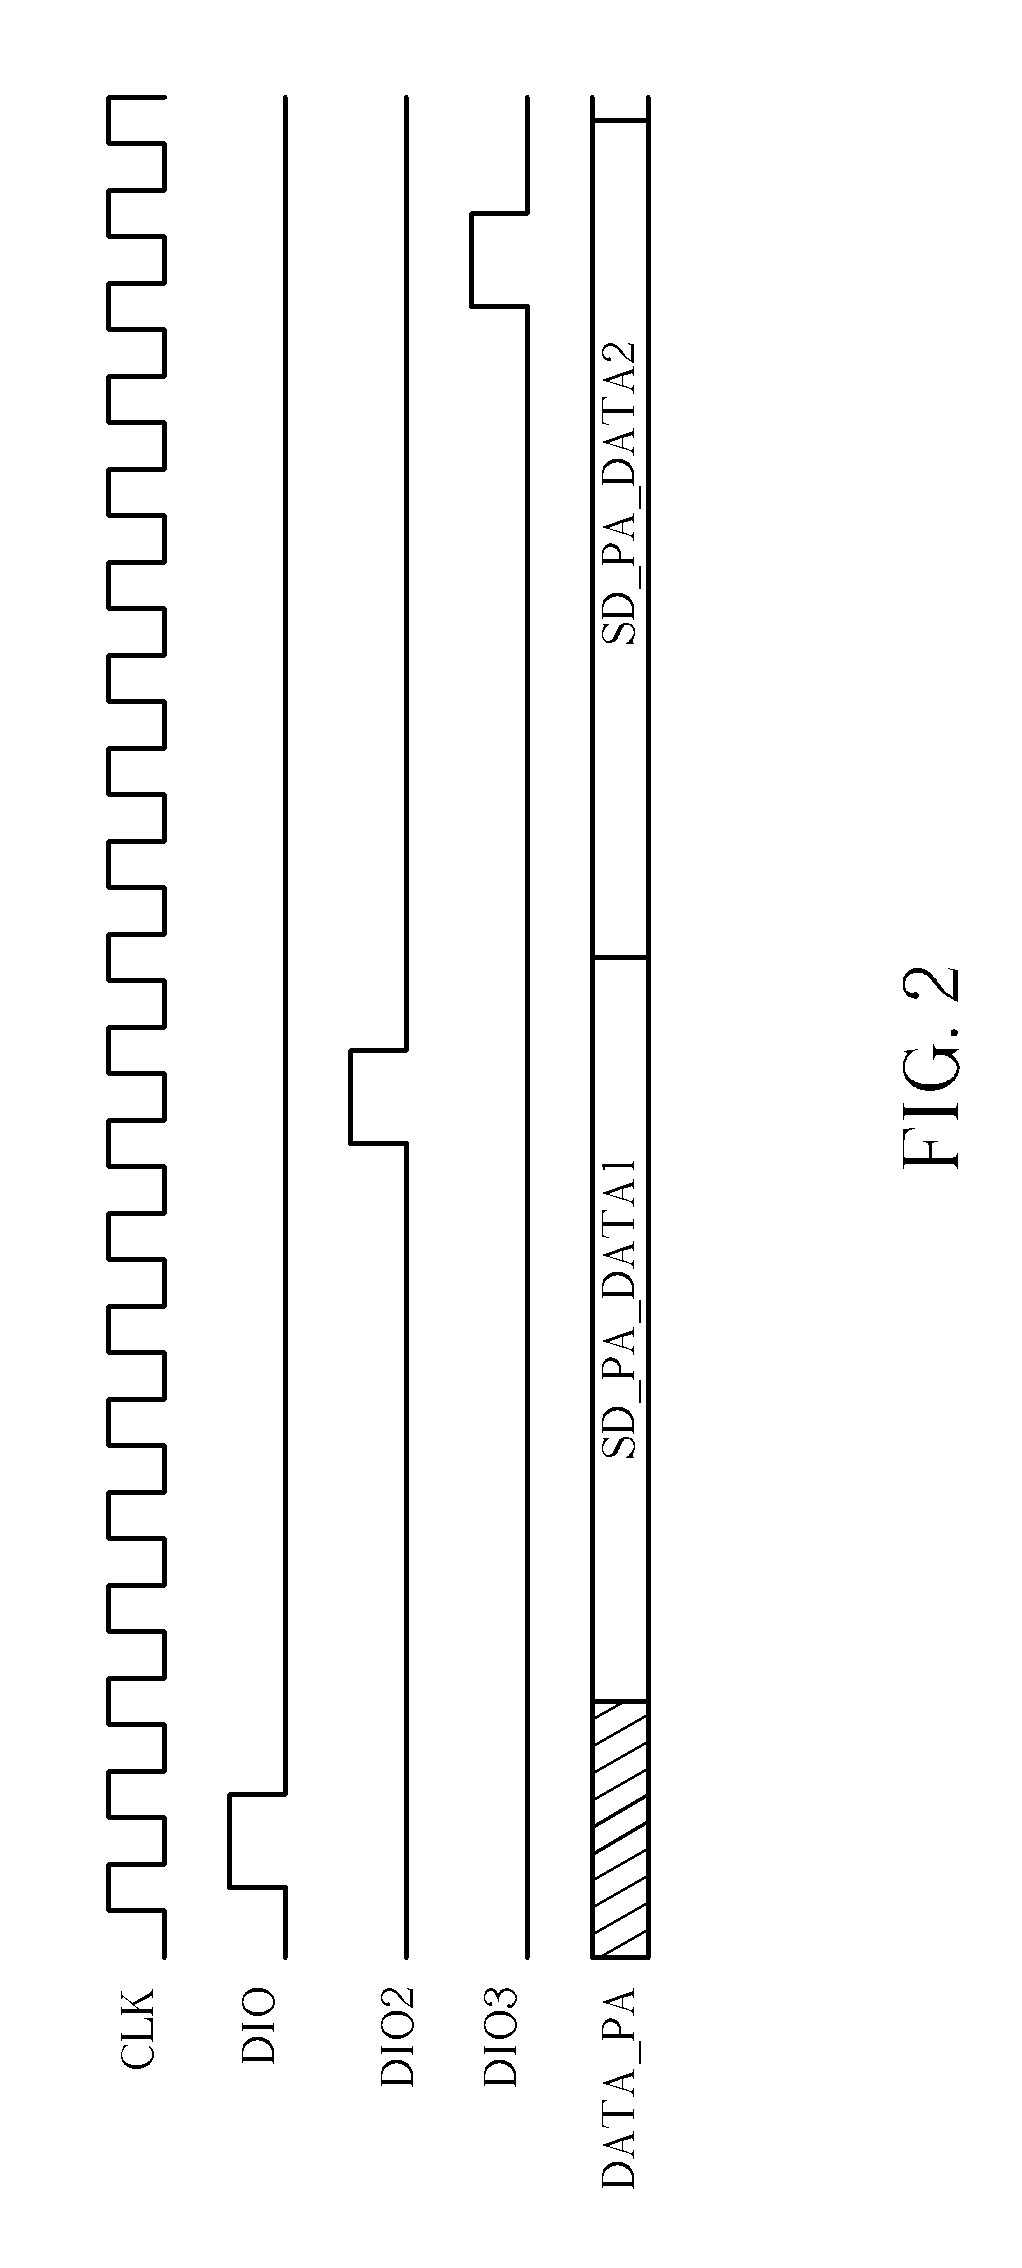 Differential signal interfacing device and related method